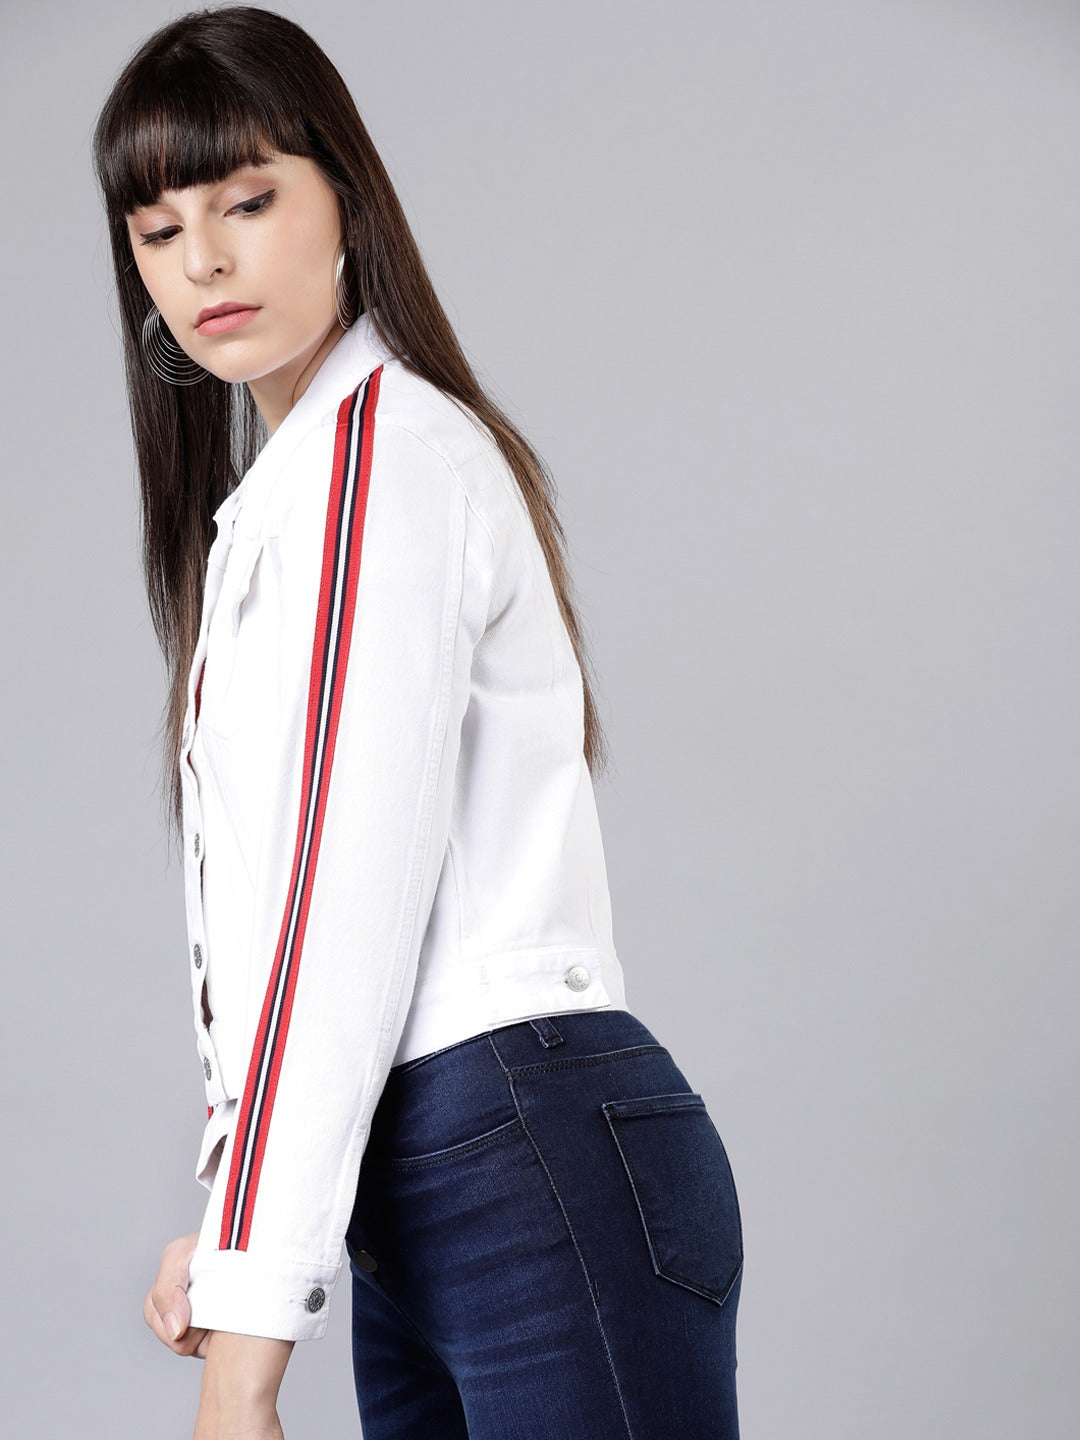 Women White Jacket  - Front View - Available in Sizes S